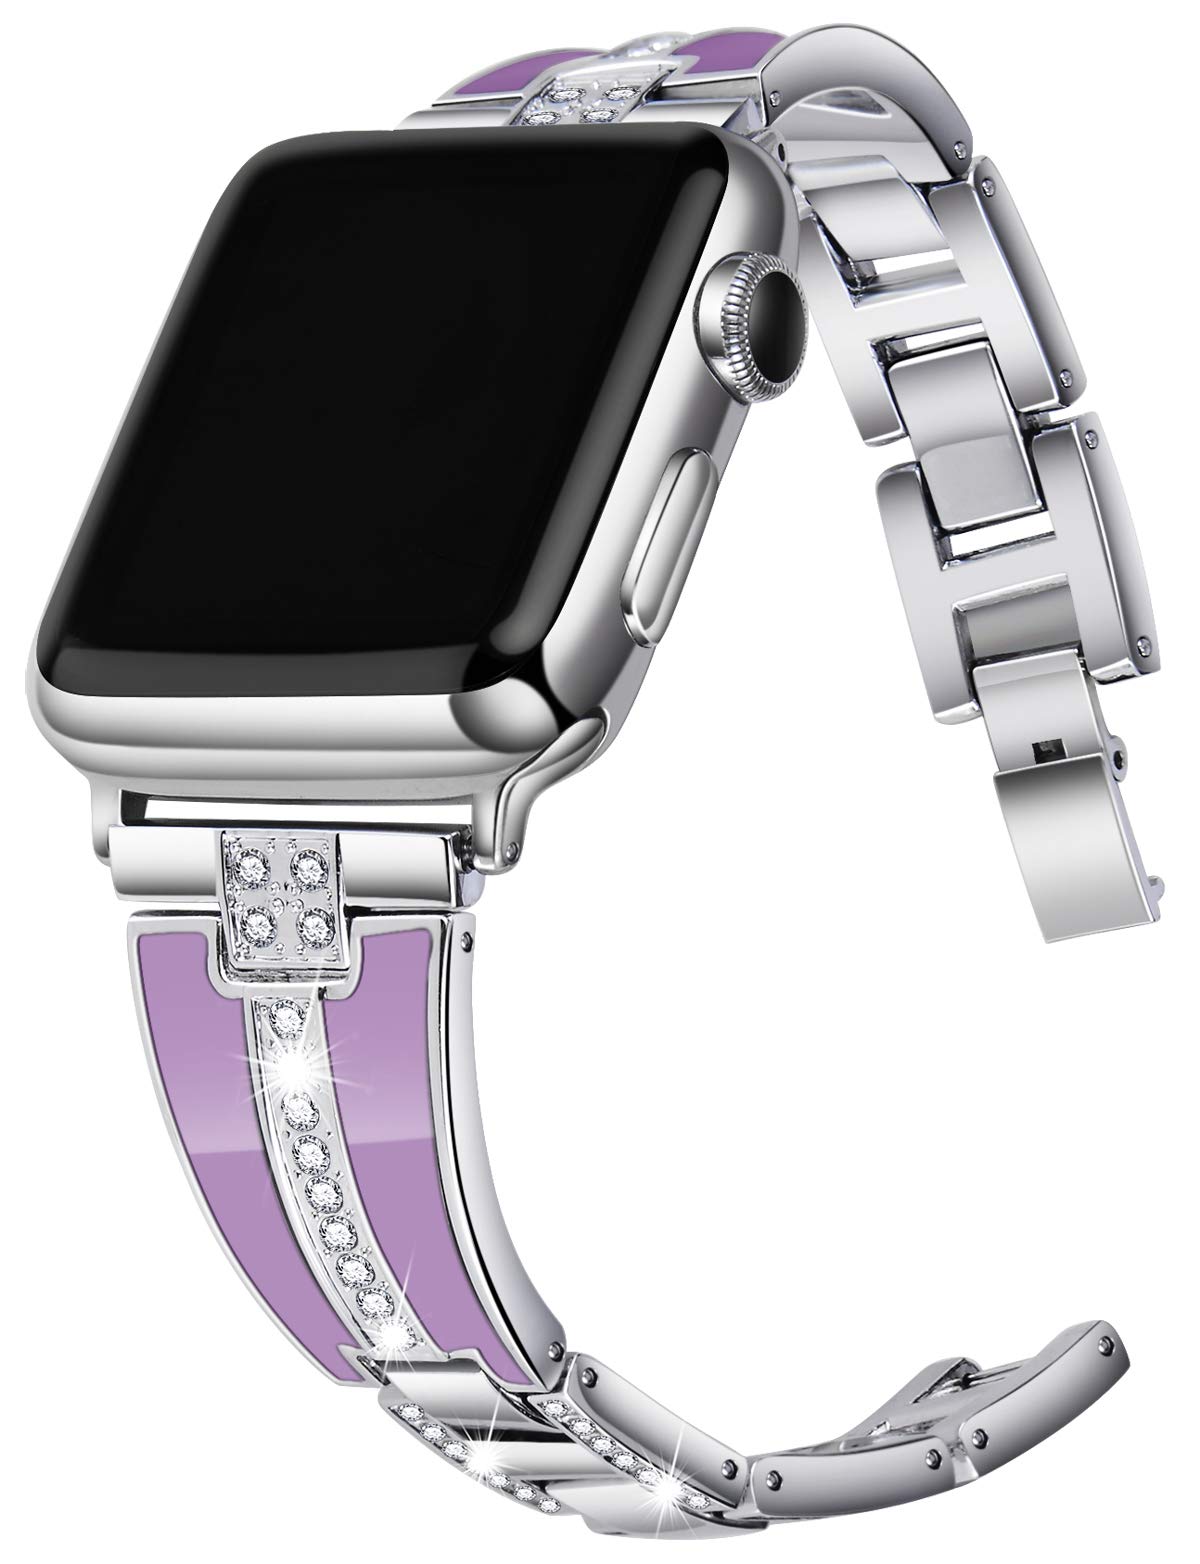 Resin with Metal strap for Apple watch